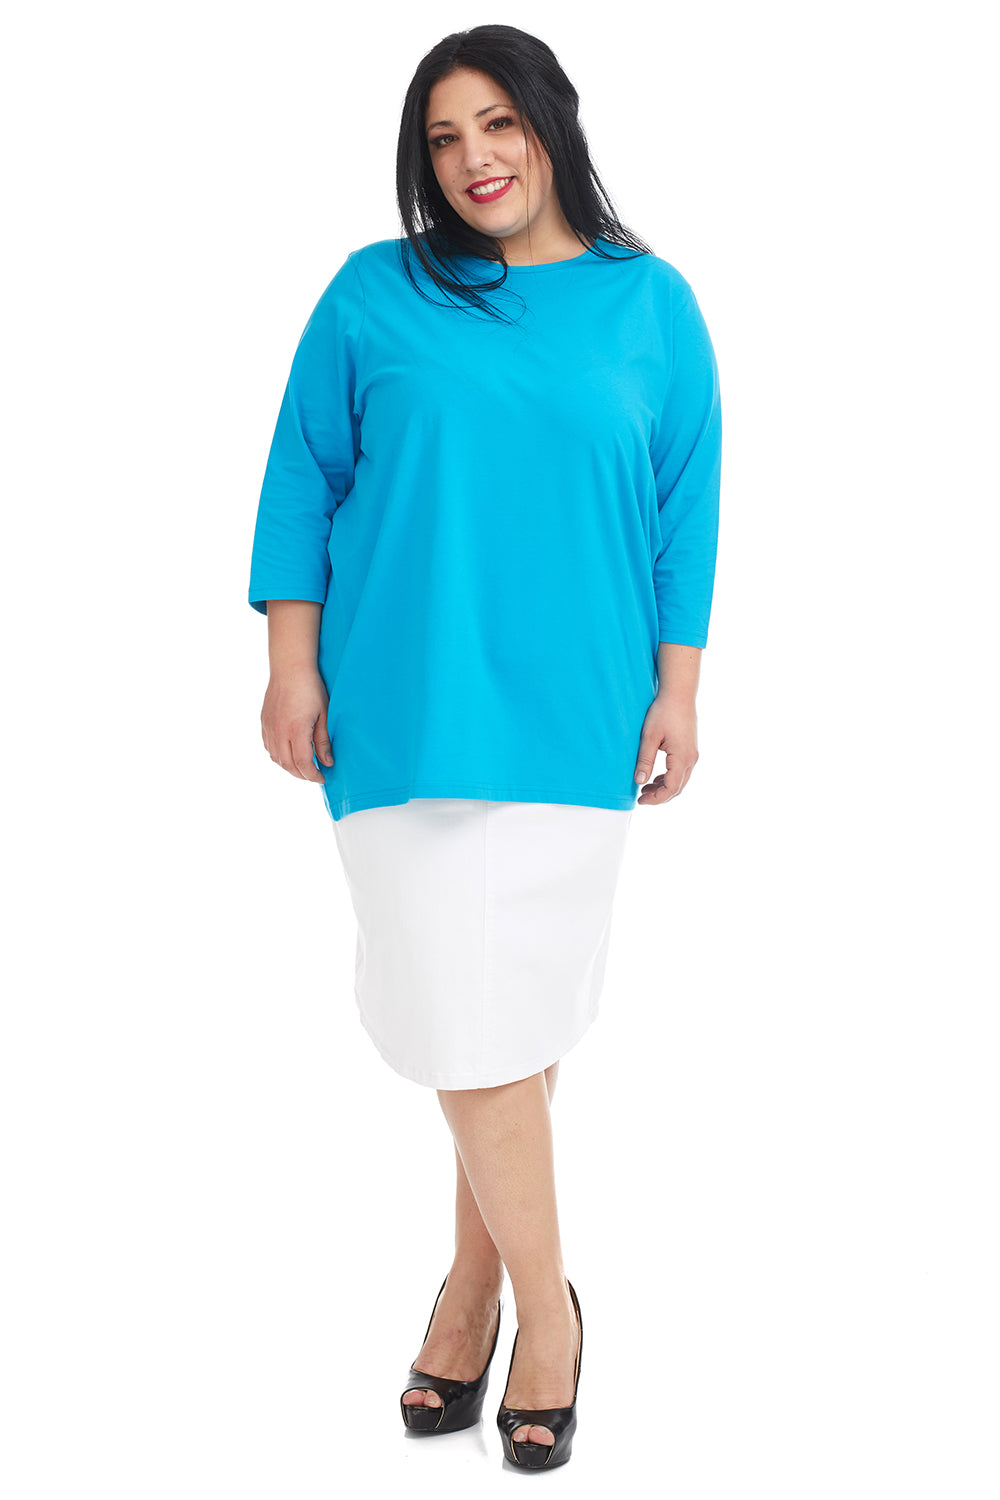 Plus size Casual blue 3/4 sleeve baggy t-shirt for women